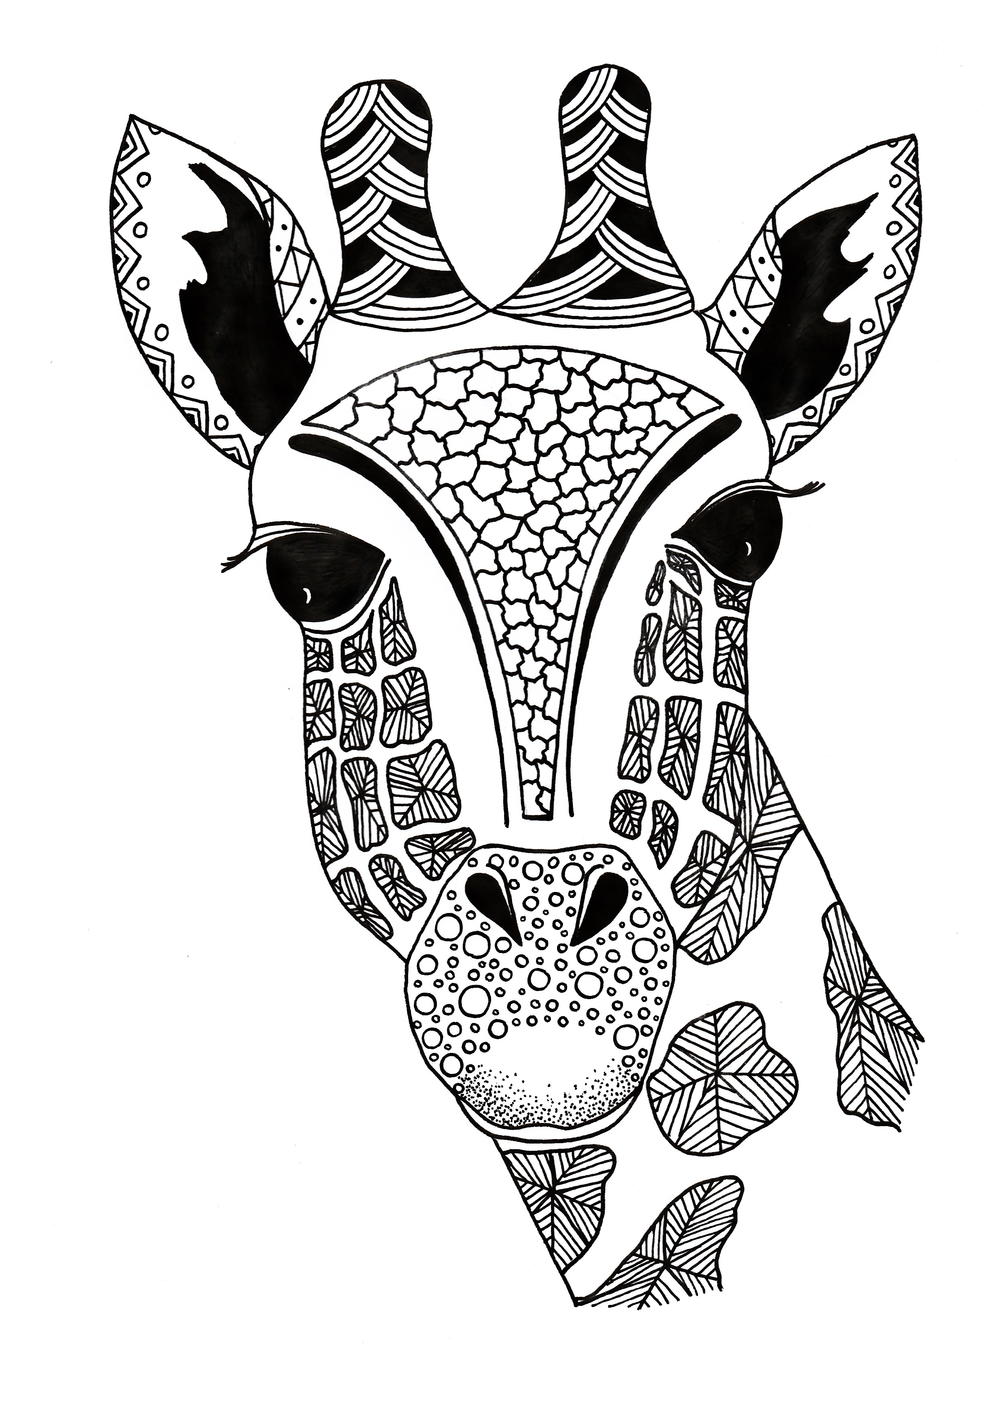 Giraffes Coloring Pages Learny Kids